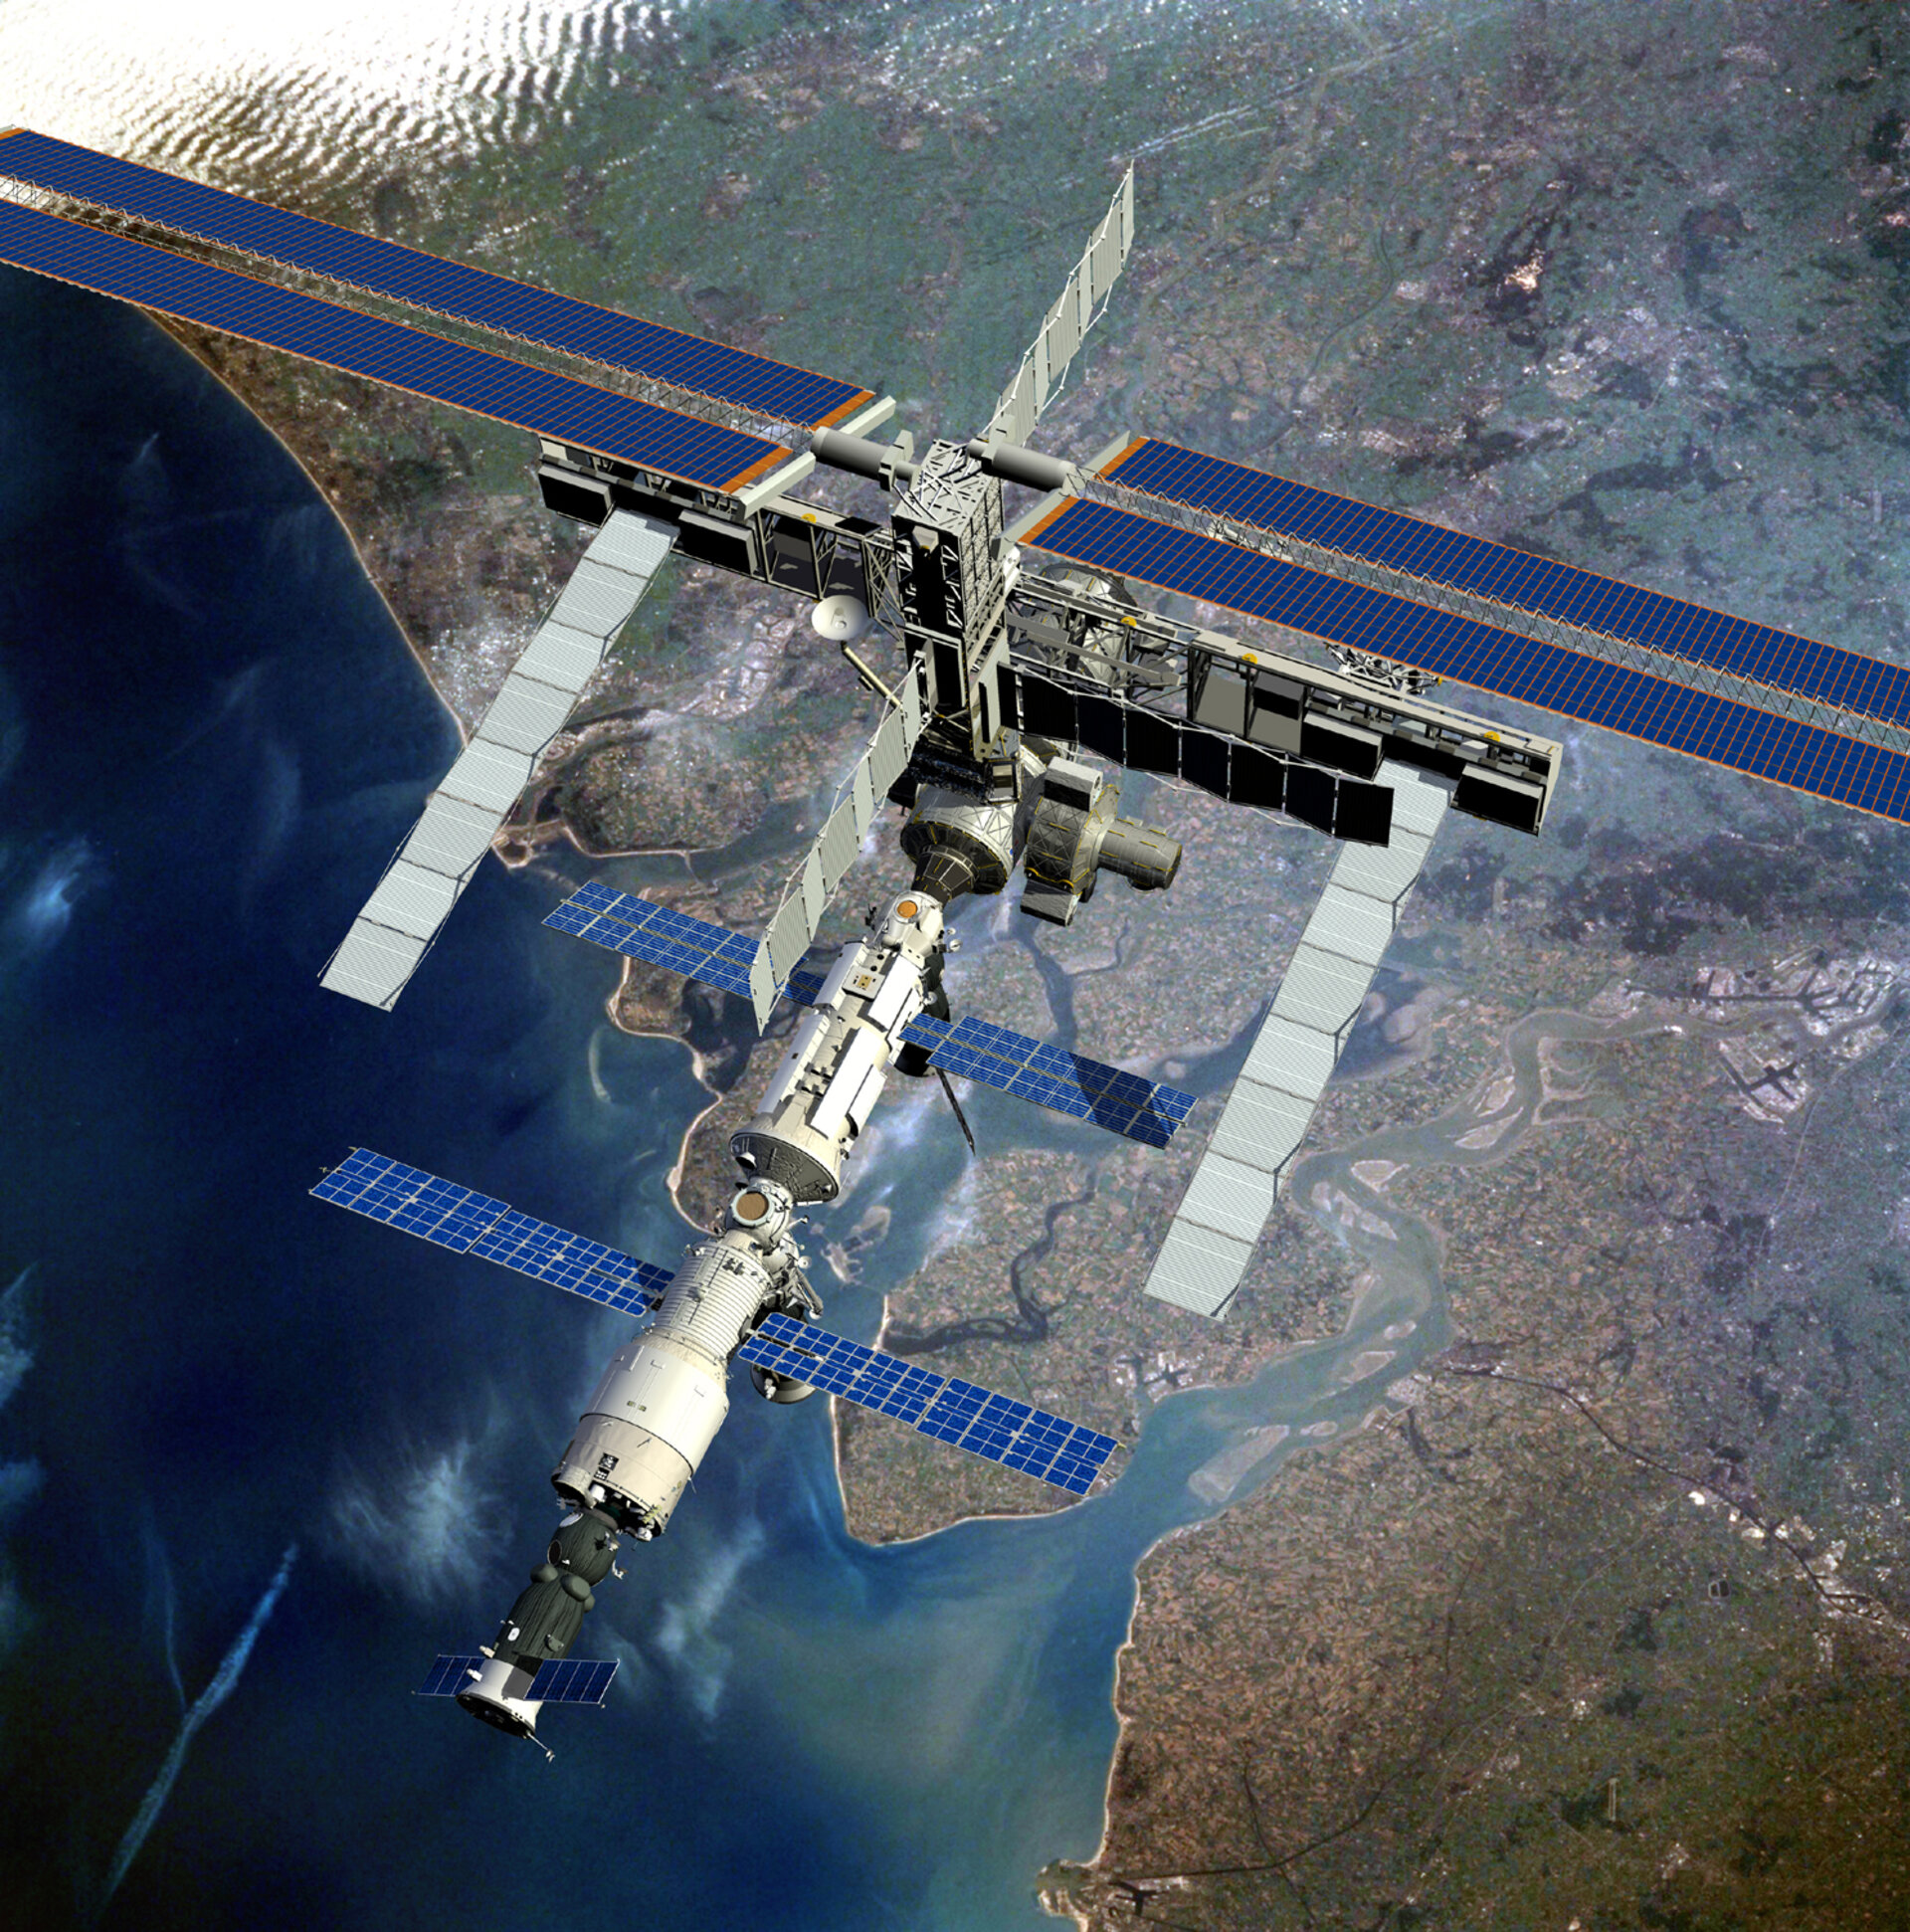 Artist's impression showing the current configuration of ISS as it passes over the Dutch coast